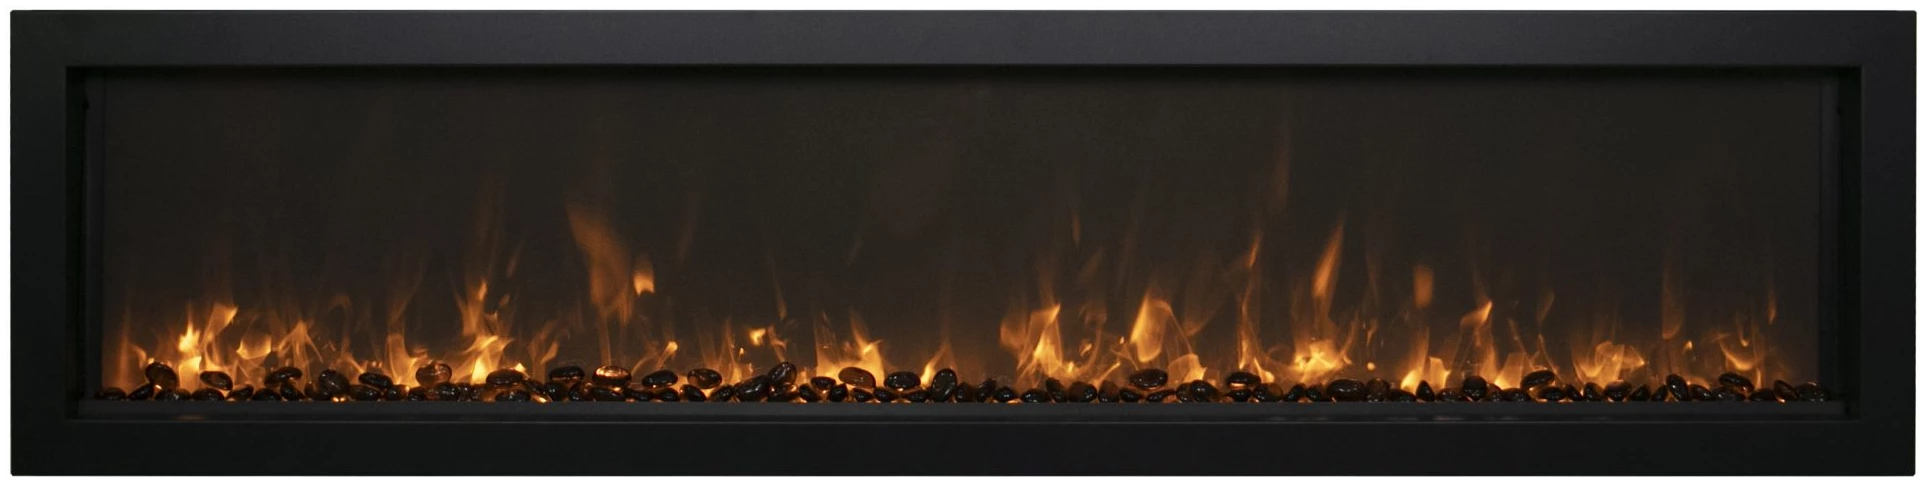 Amantii Panorama Built-in-Only Slim w/ Optional Black Steel Surround Electric Fireplace